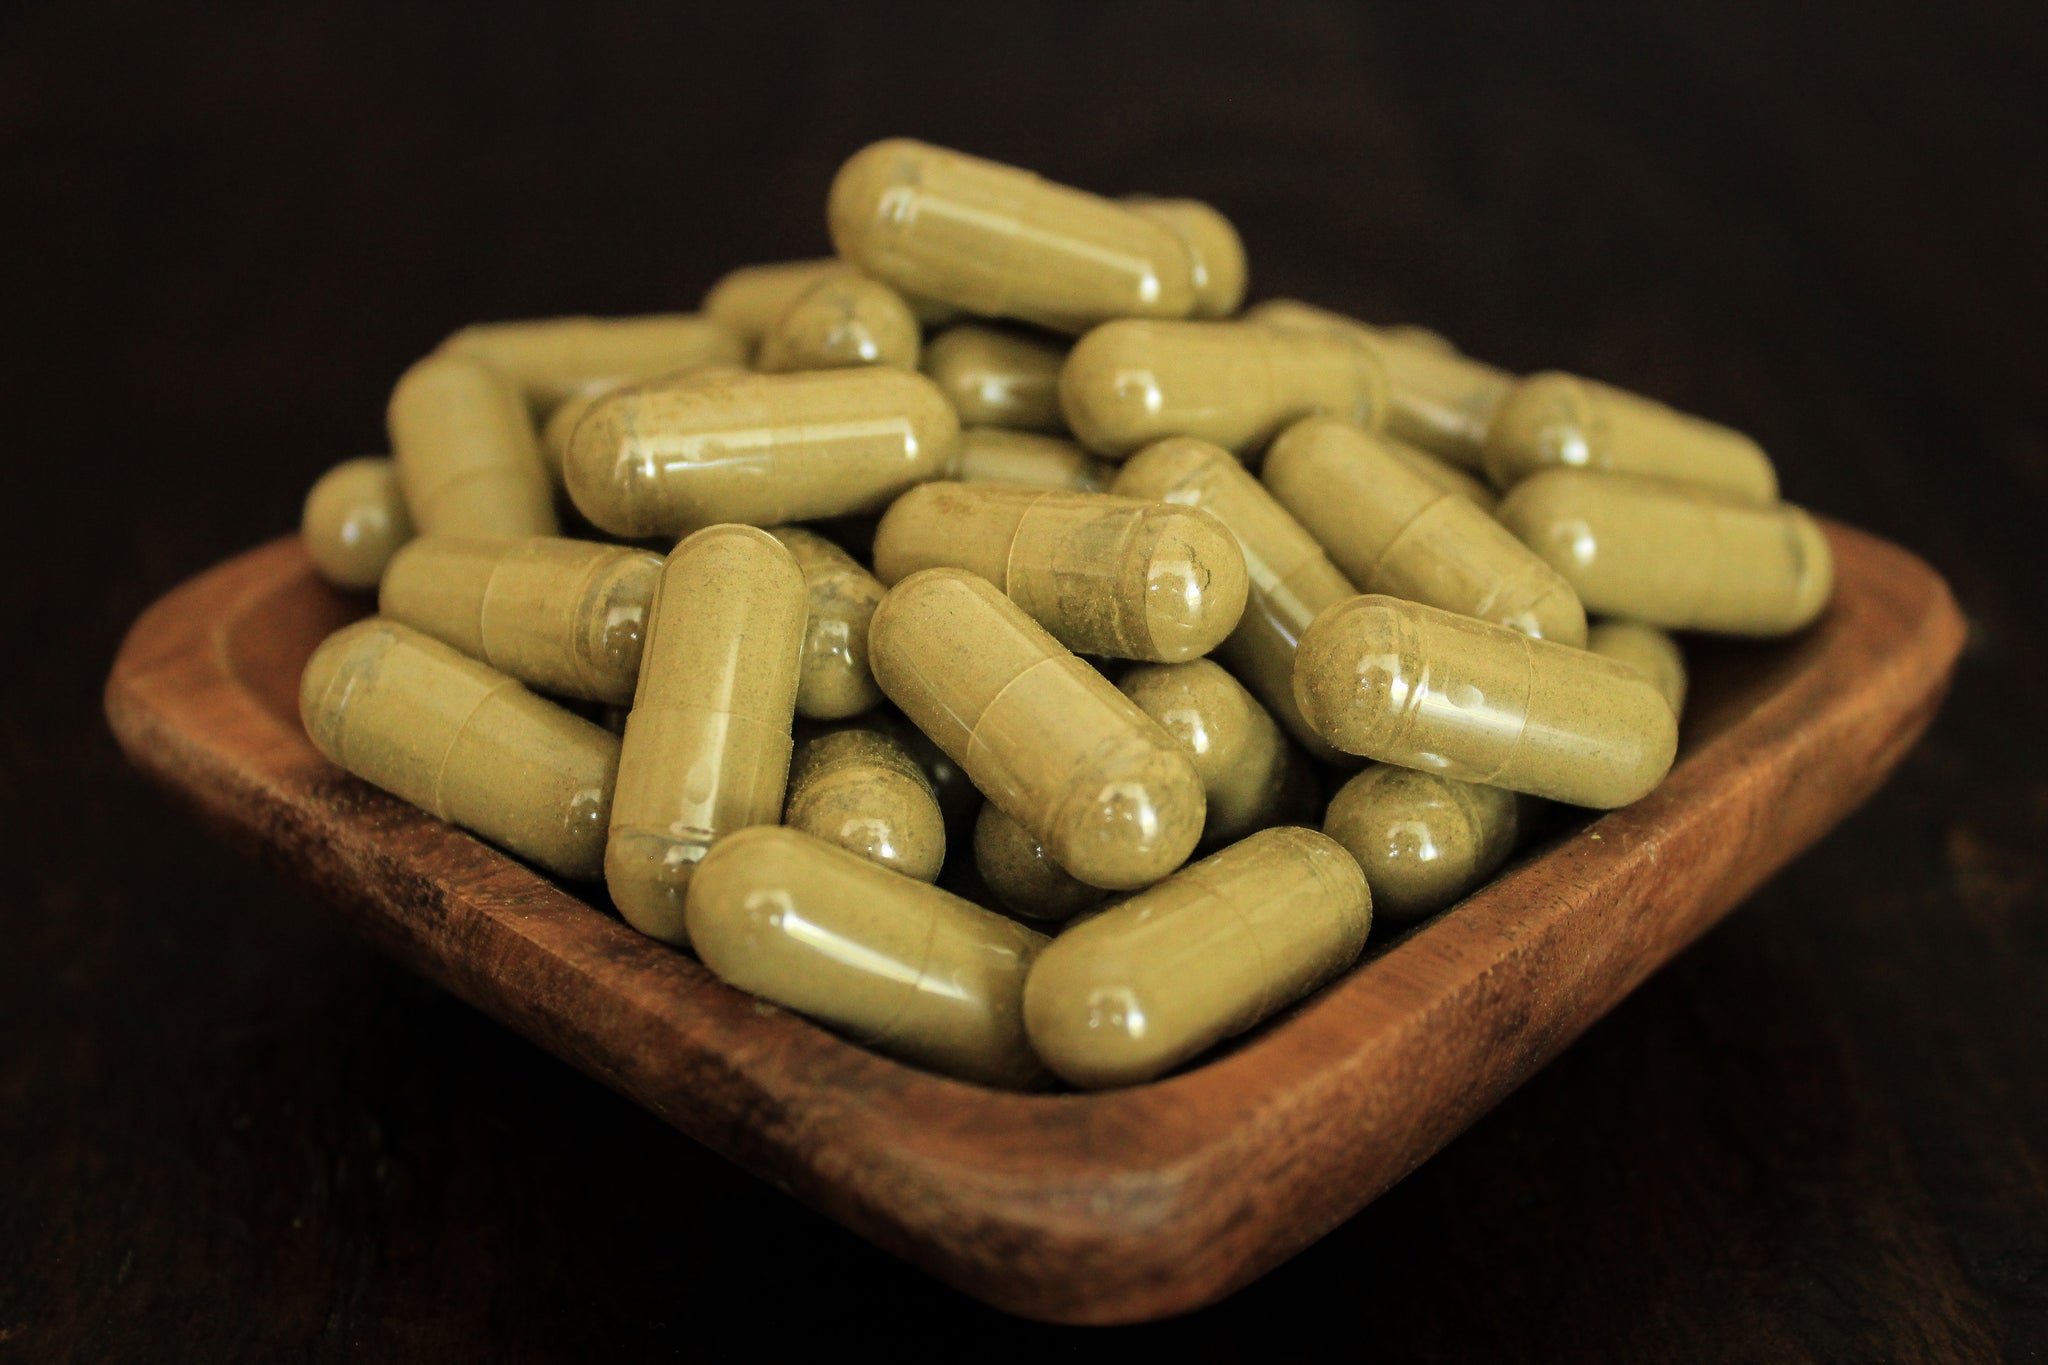 Super Red leaf powder in 1000 mg  gelatin capsules in a wooden bowl for close up